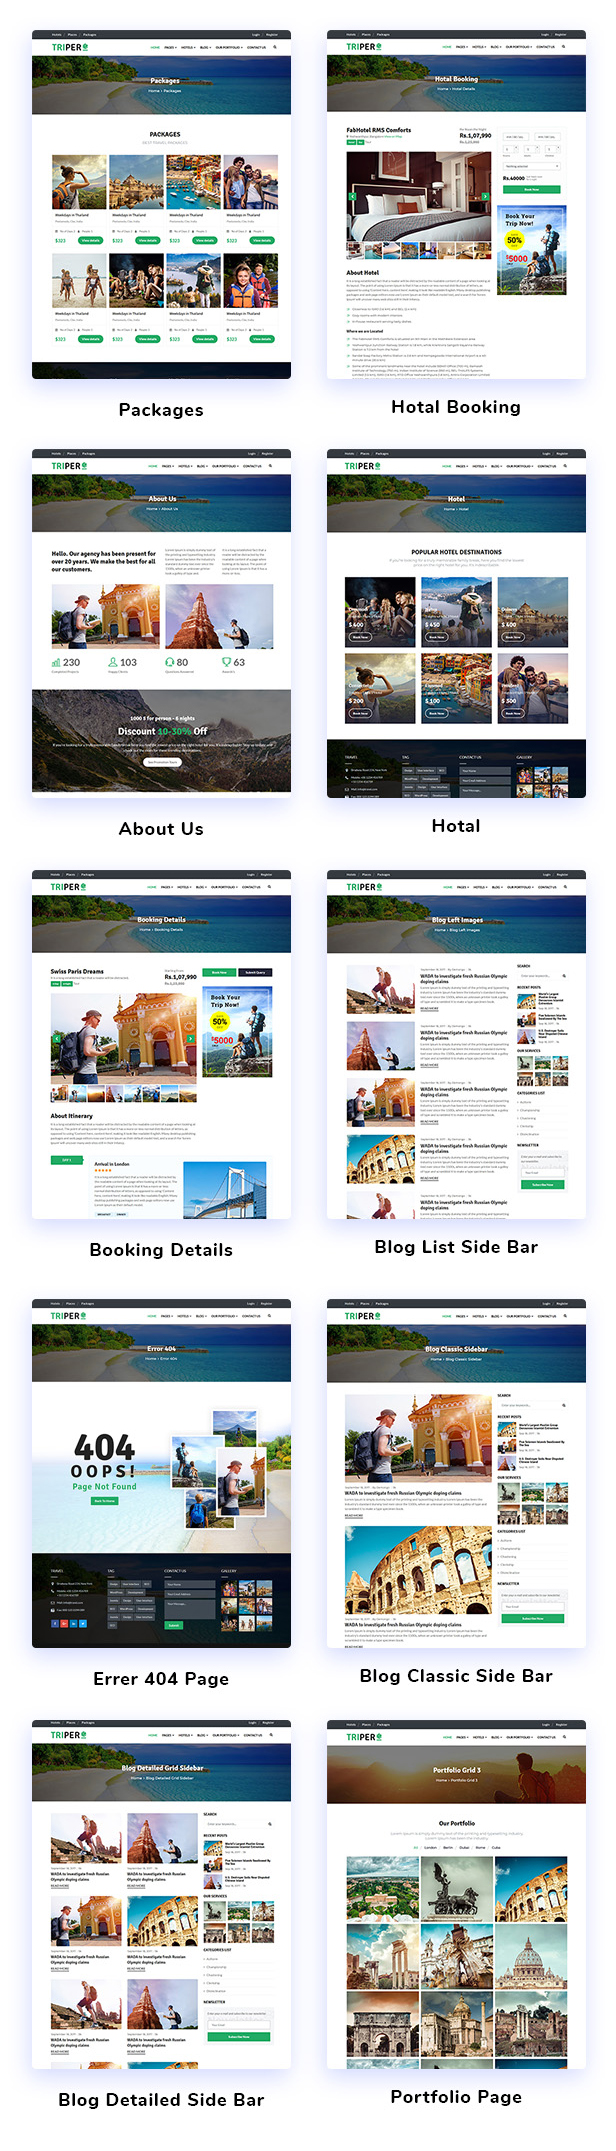 Triper: Creative Tour & Travel, Hotel Booking Agency HTML Template - 4